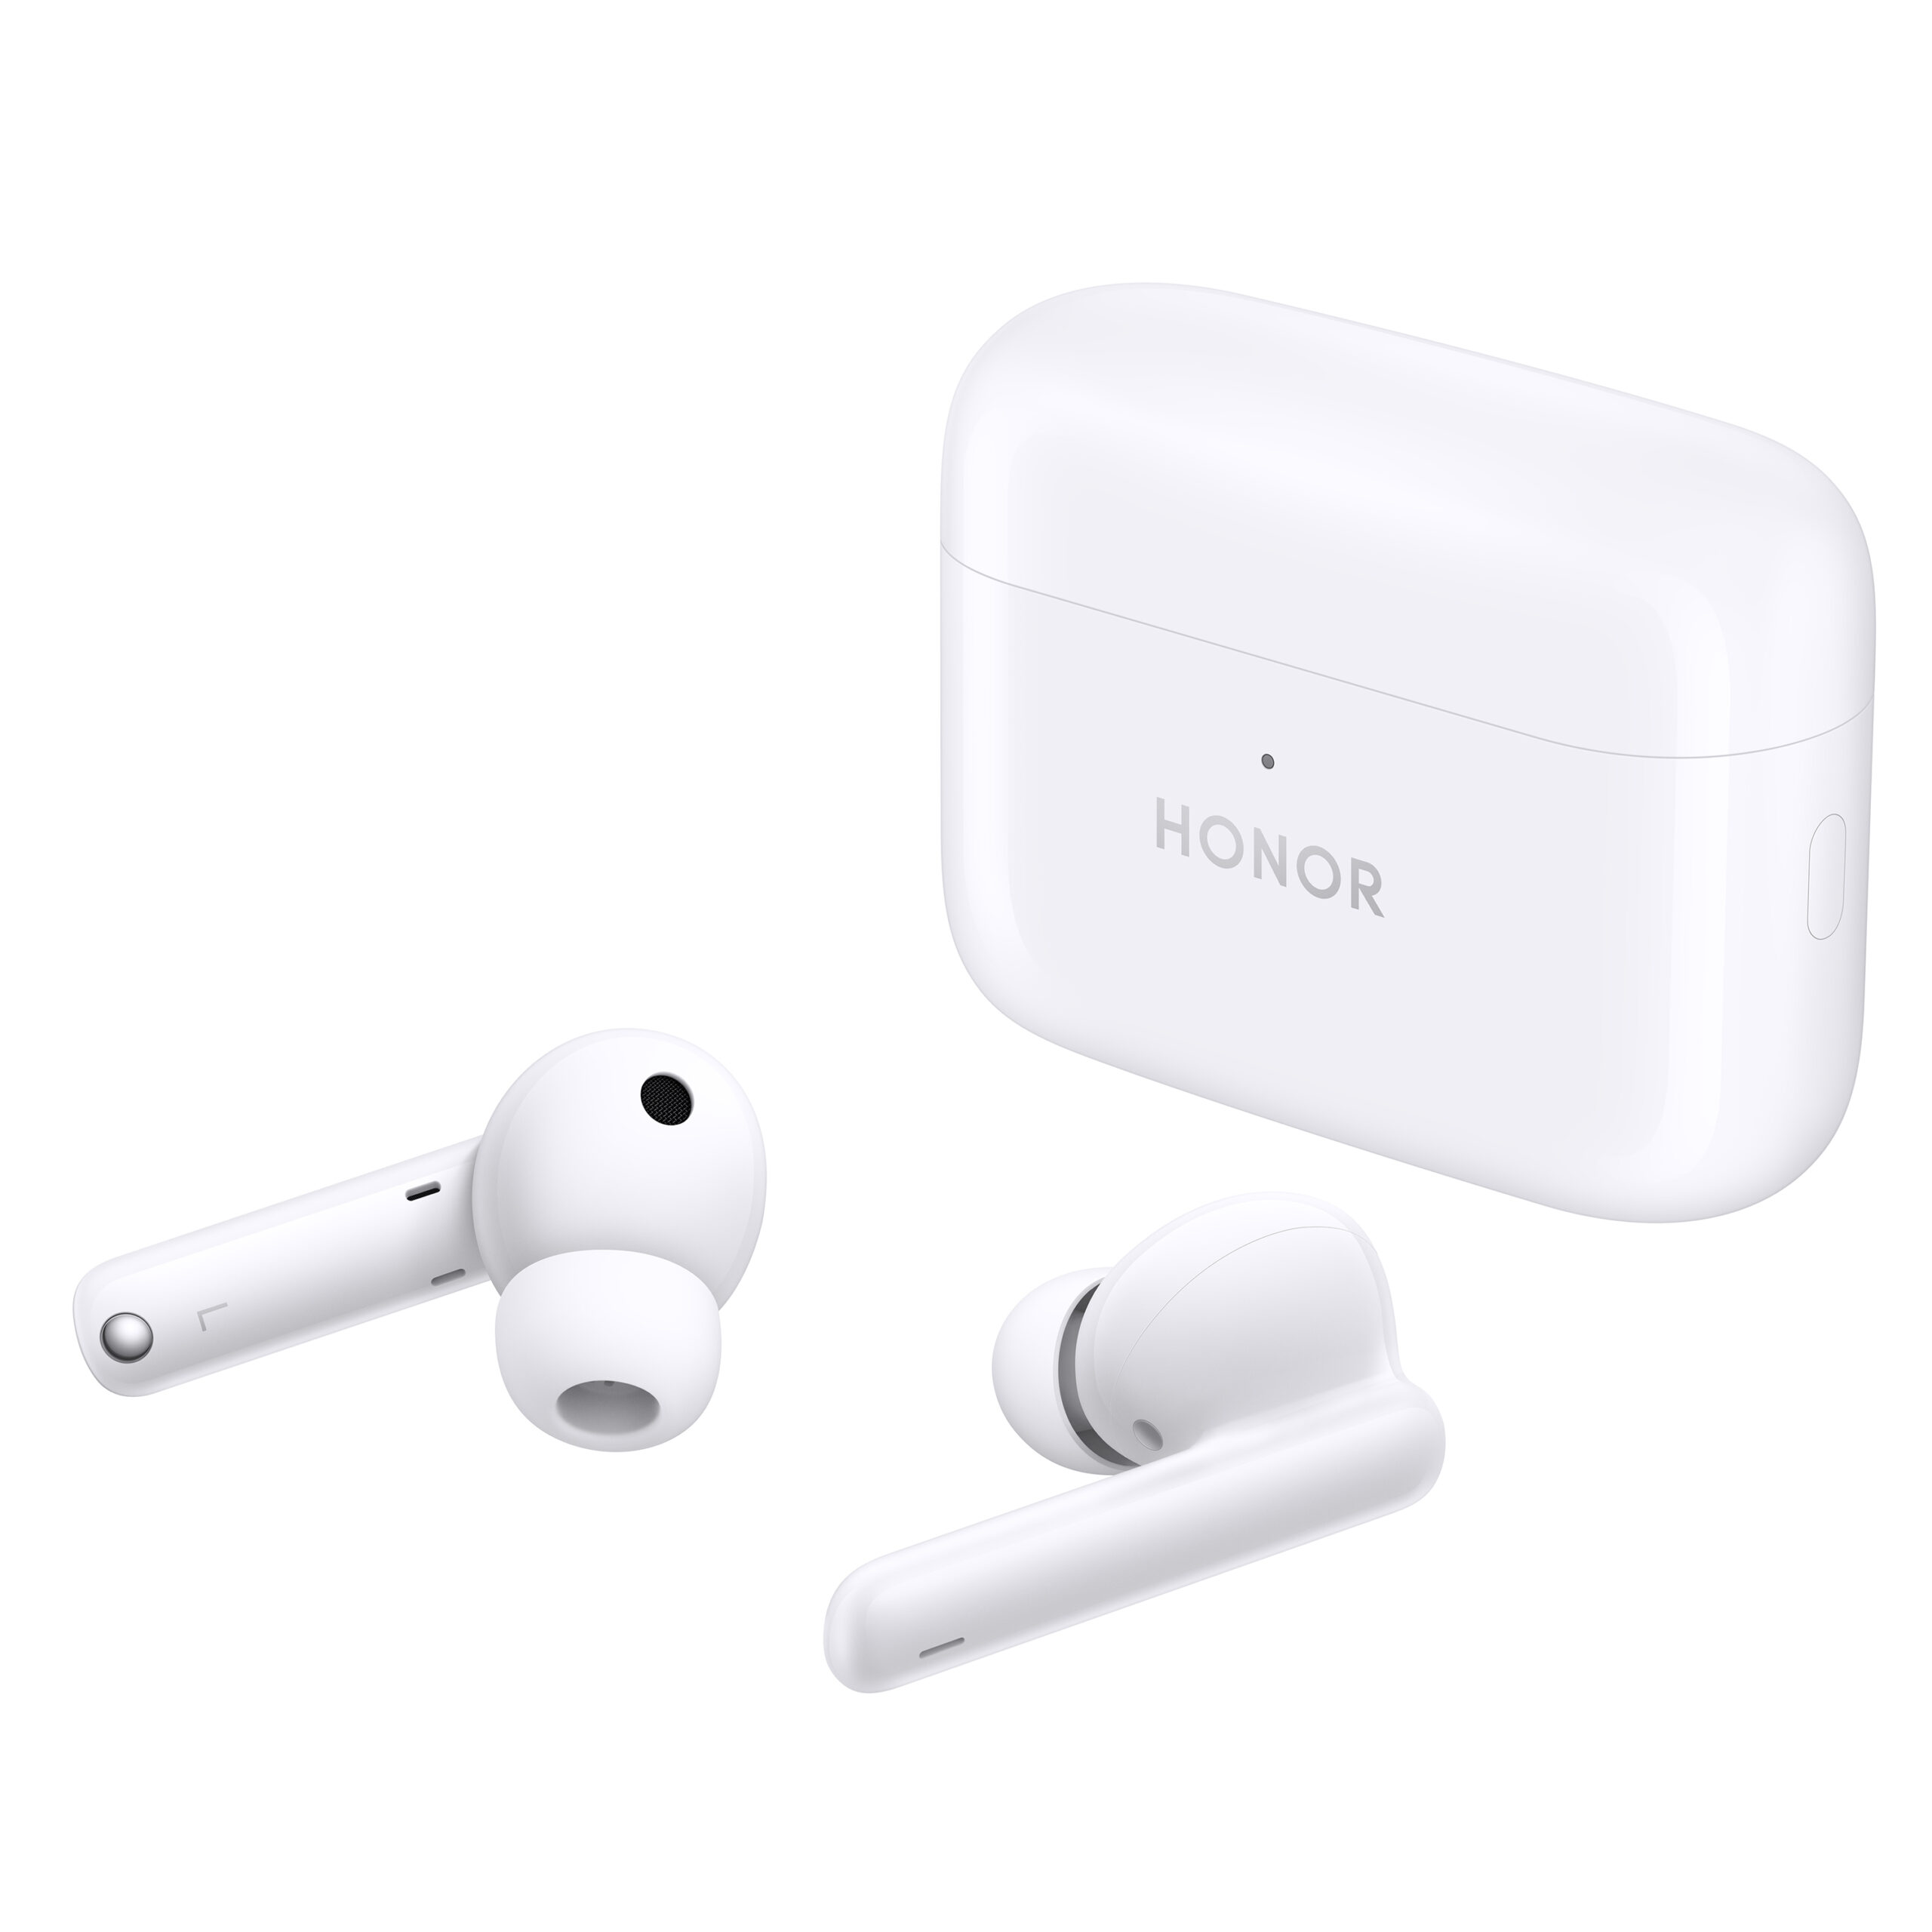 HONOR Earbuds 2 Lite Visual 3 1 scaled